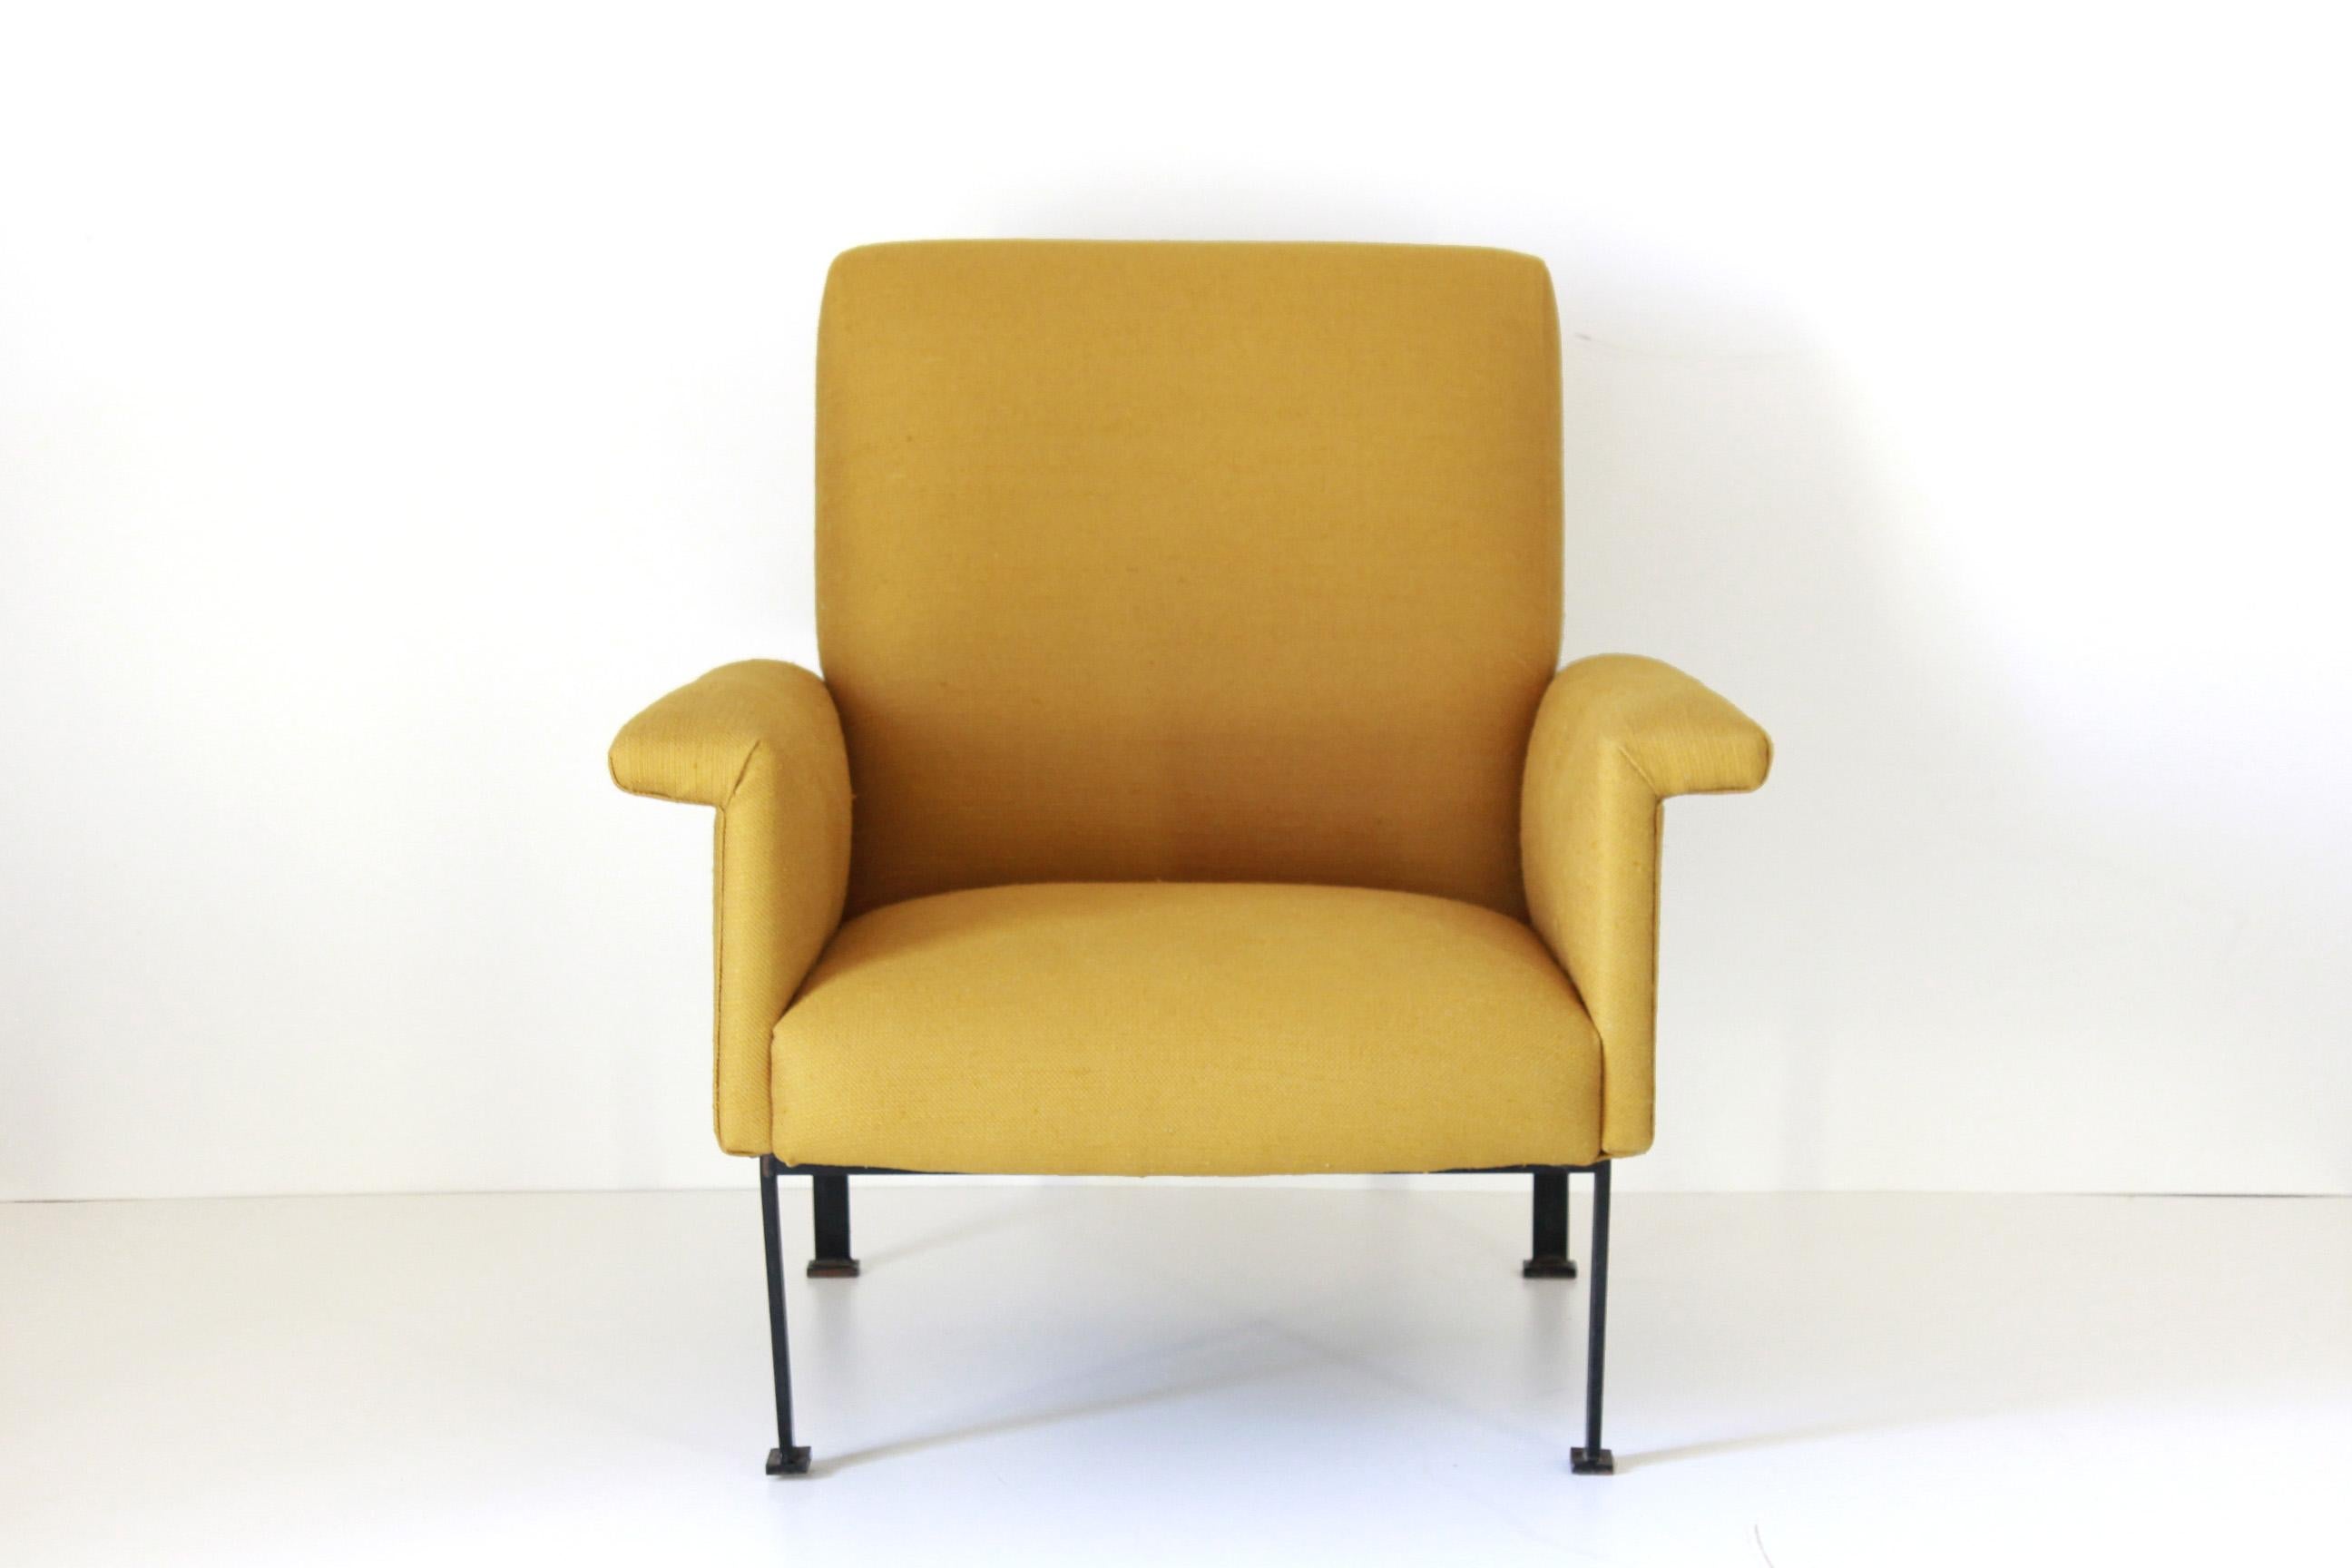 Vintage yellow Armchair, Italy 1950s
A 1950s vintage armchair with yellow fabric cover and iron and brass legs. Item restored, filling and cover brand new. In excellent conditions.


